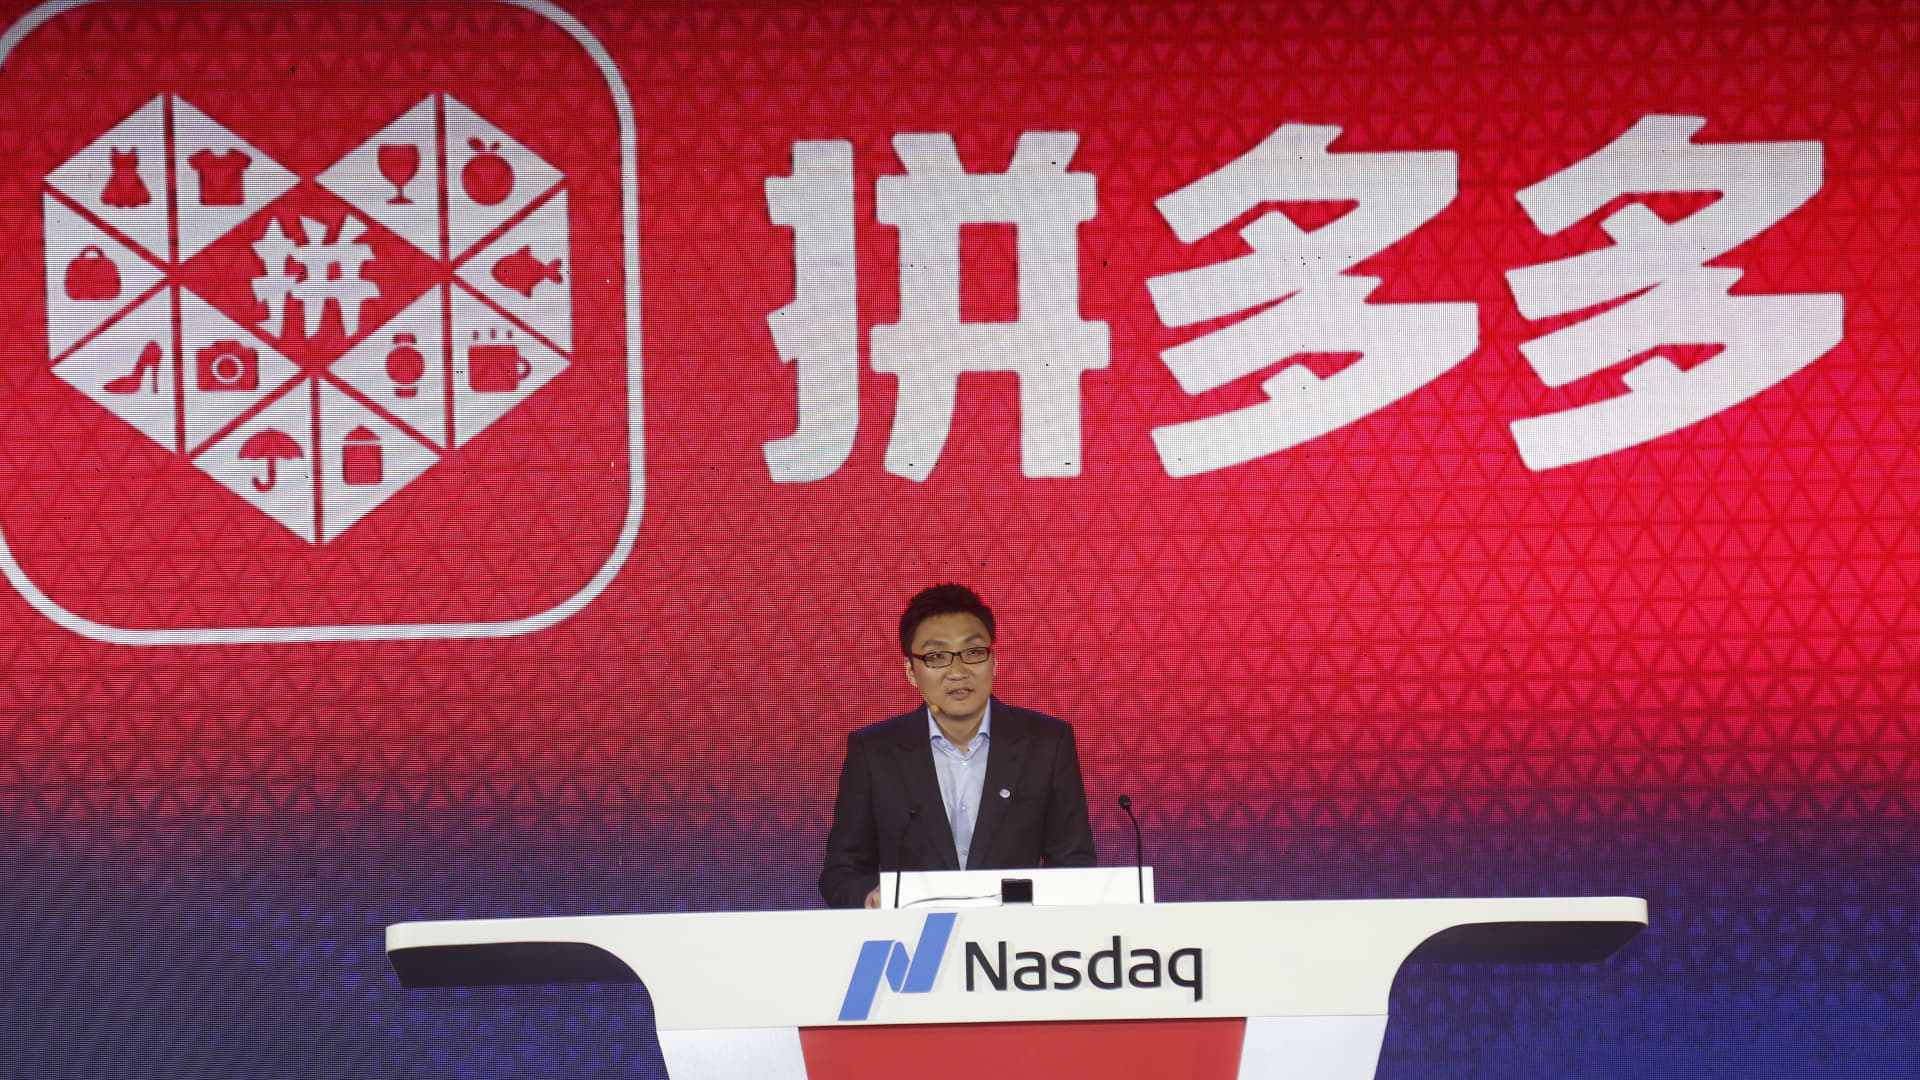 Colin Huang, chief executive officer and founder of Pinduoduo, speaks during the company's listing ceremony at Shanghai Tower on July 26, 2018 in Shanghai, China.